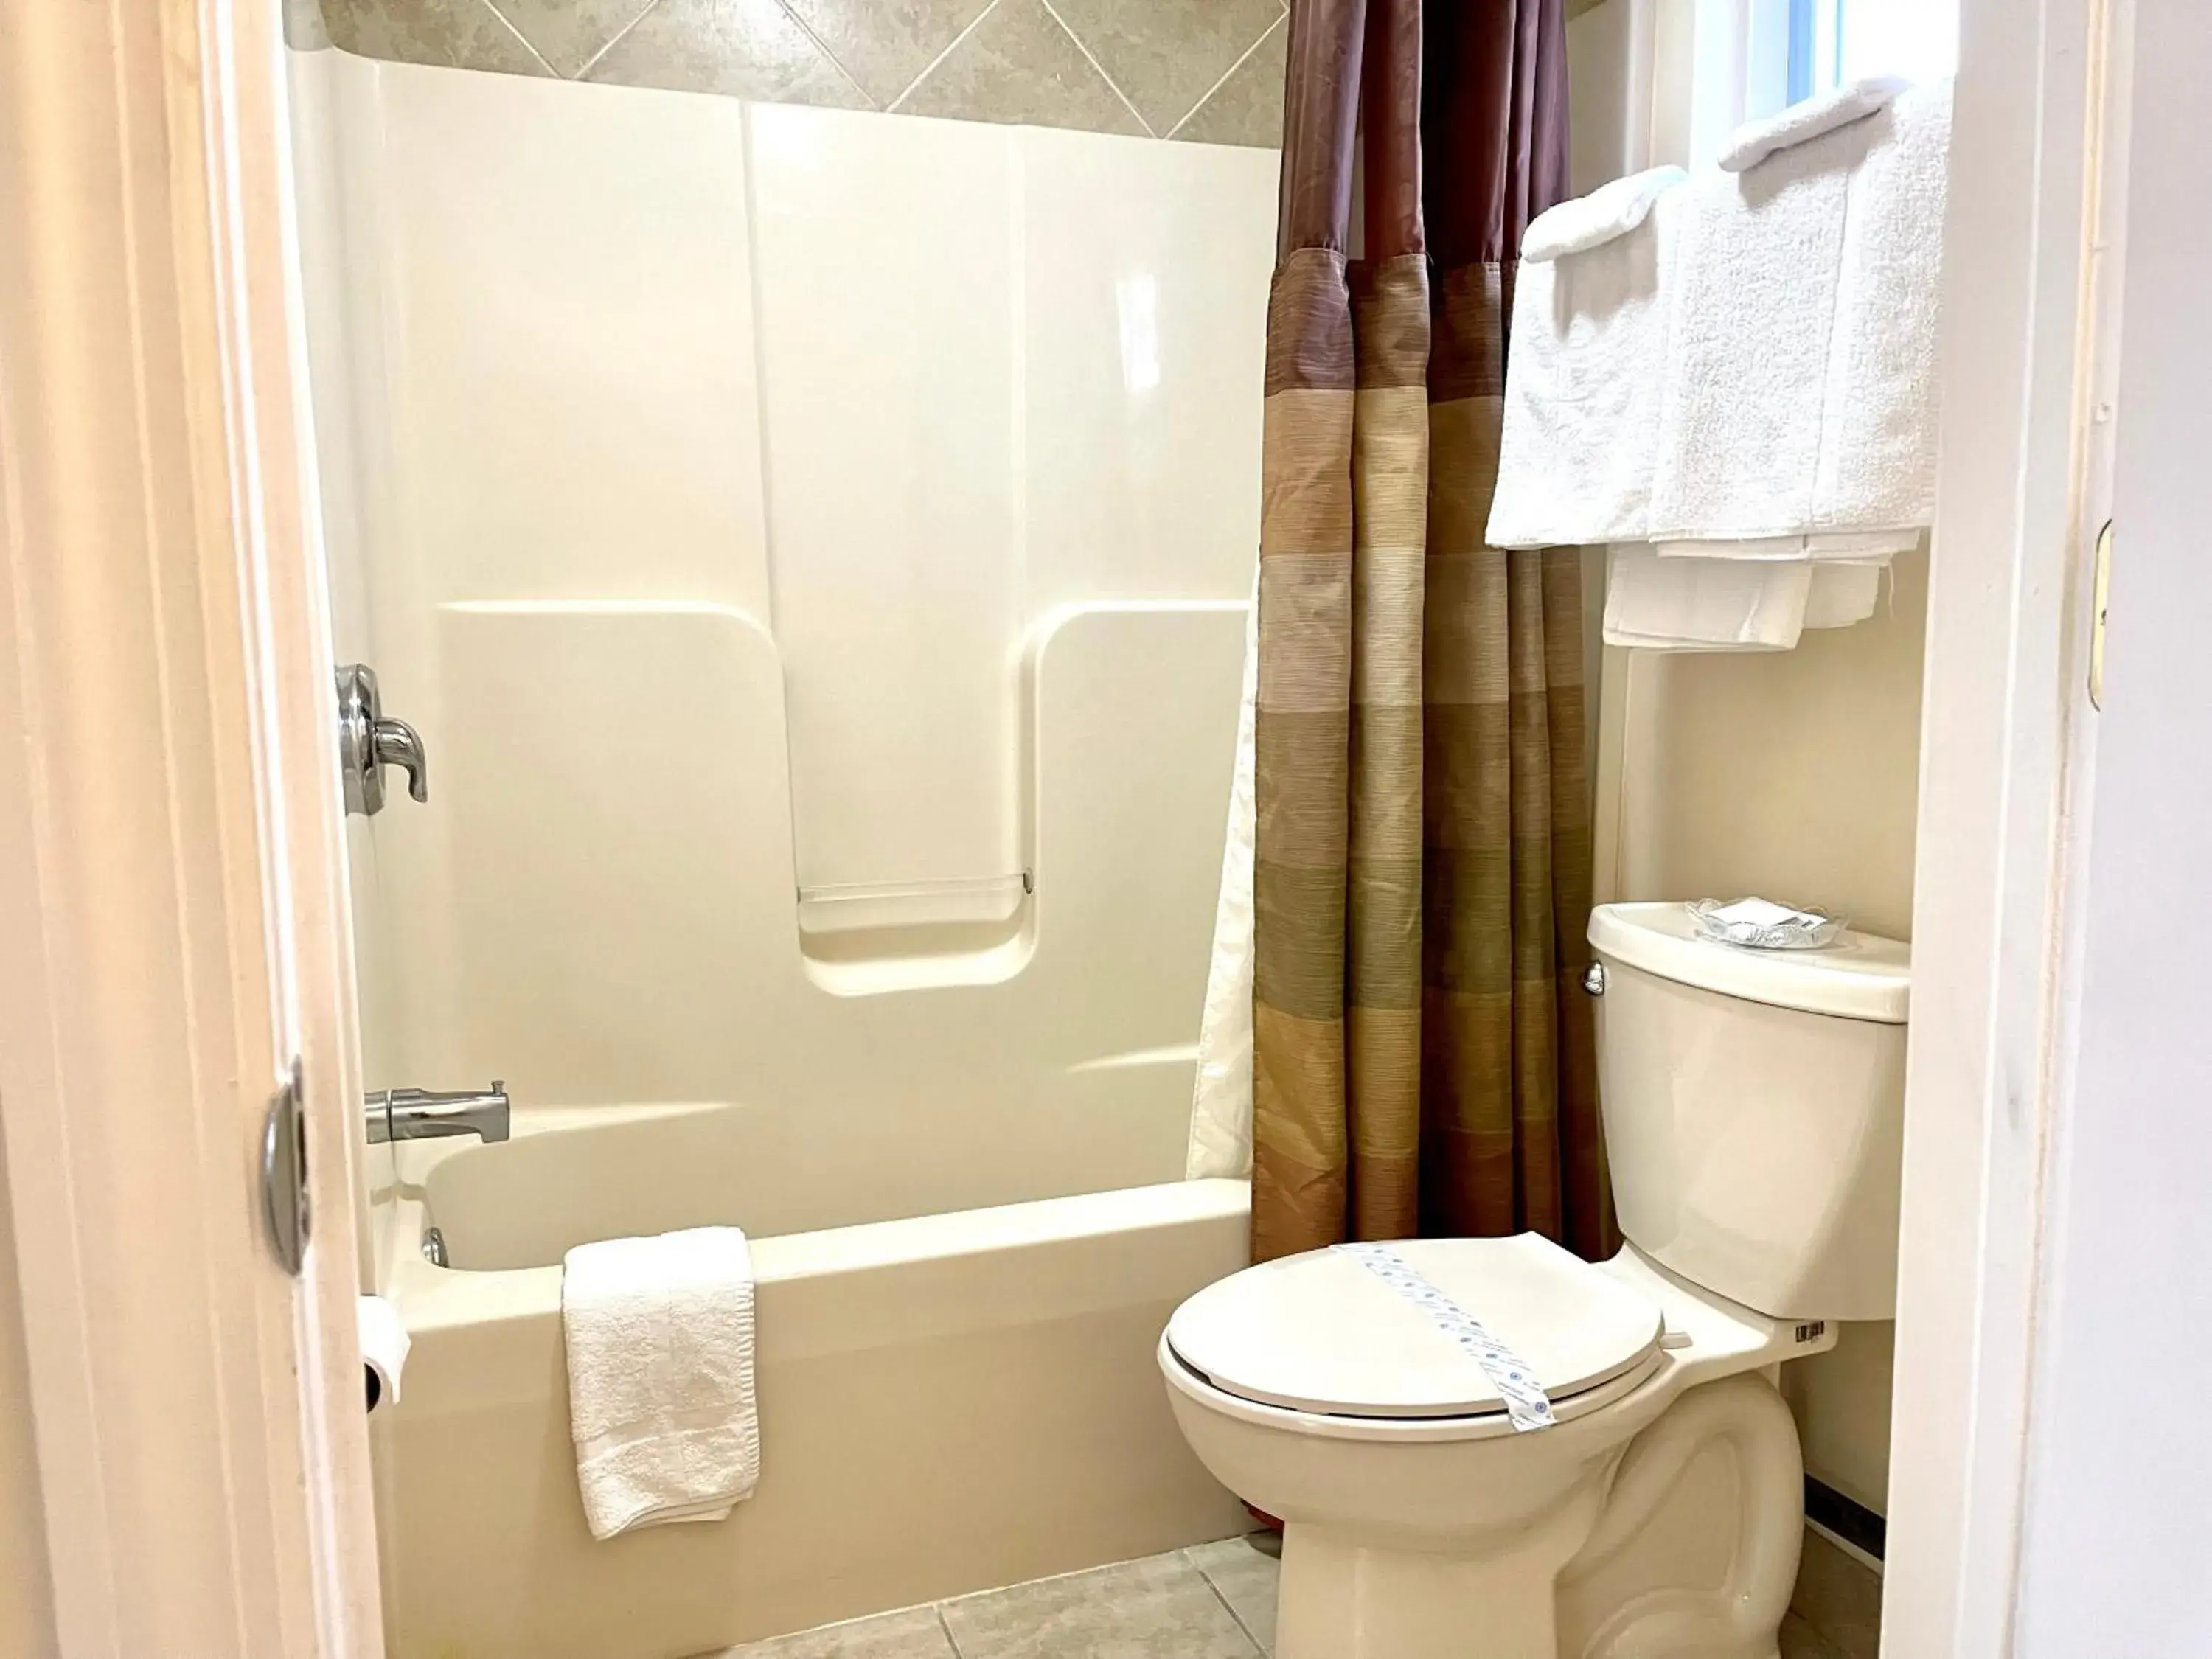 Bathroom in Passport Inn Somers Point - Somers Point